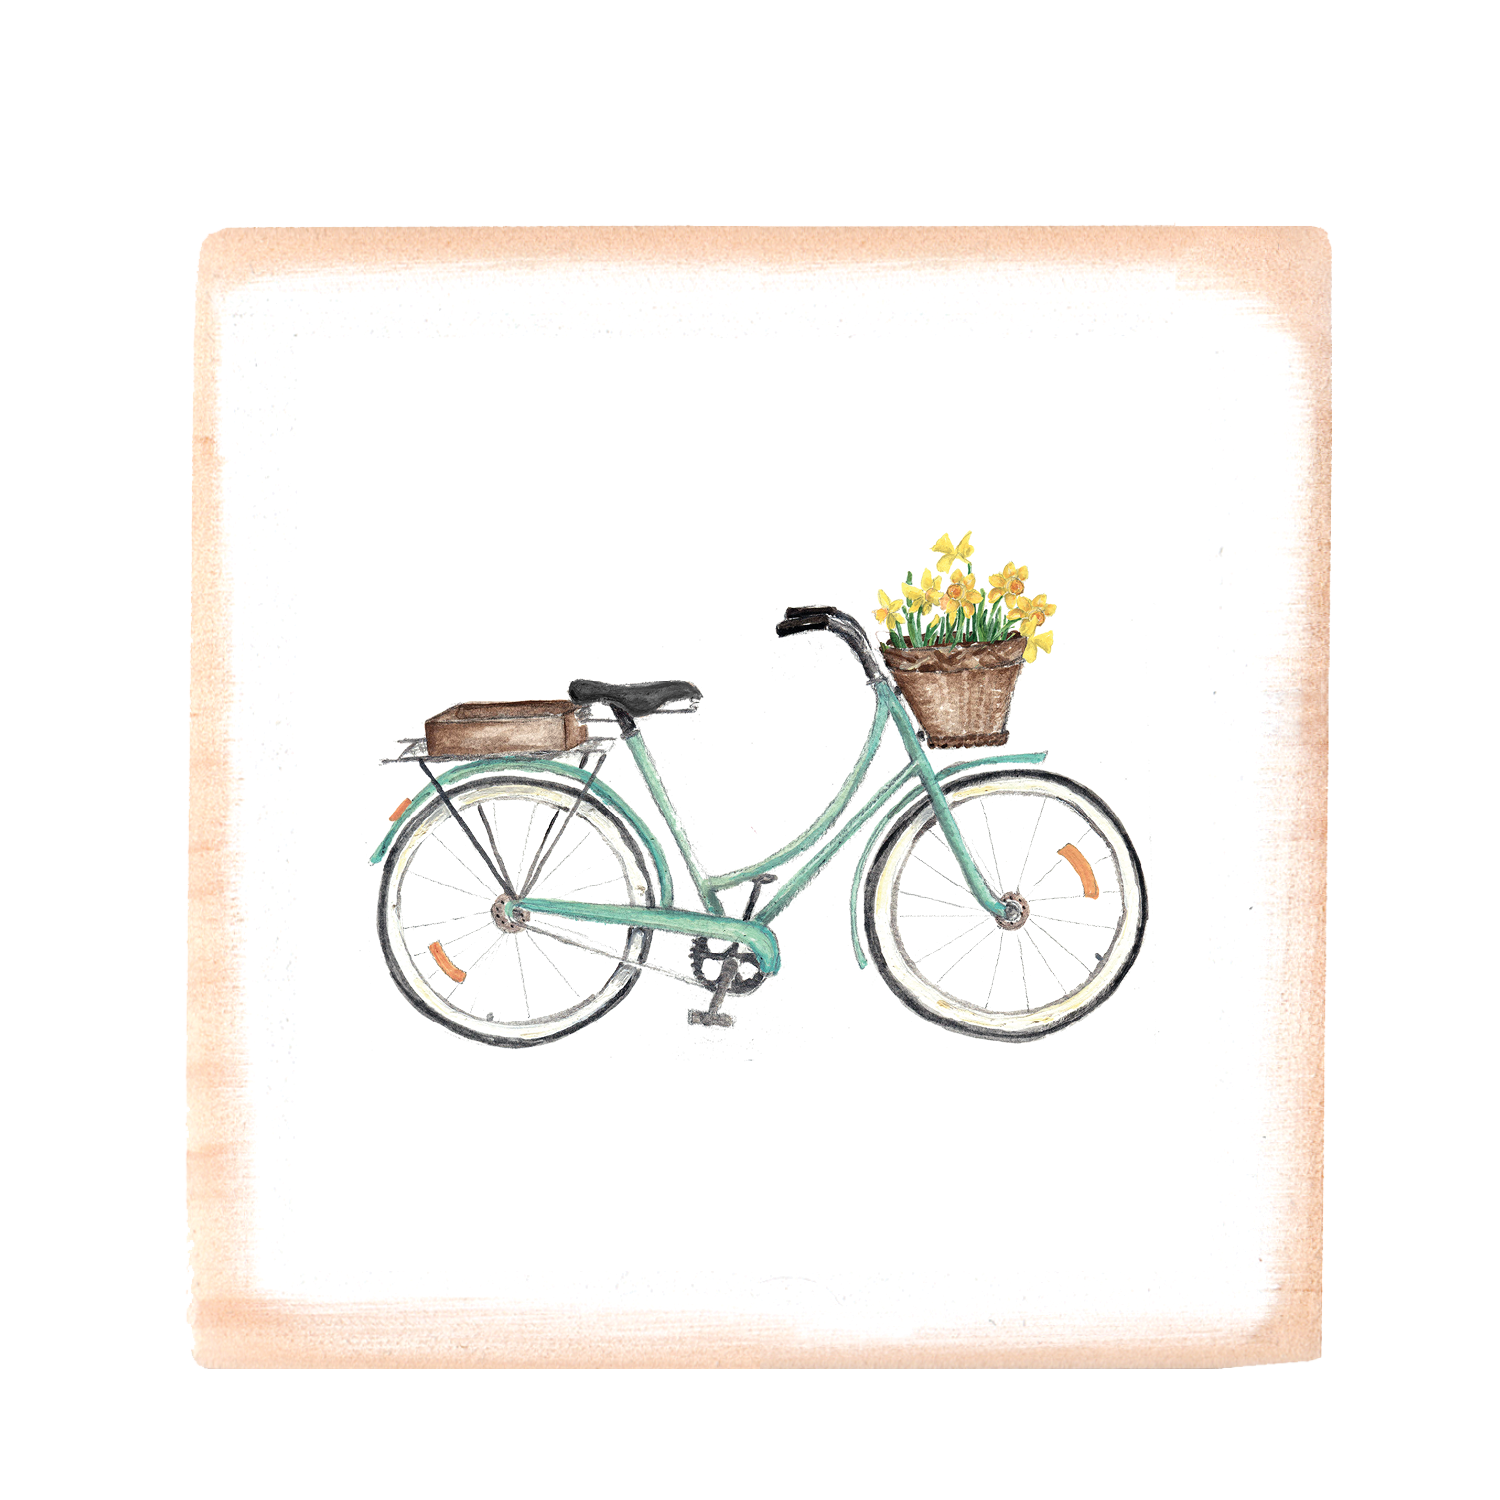 seafoam bike with daffodils in front square wood block